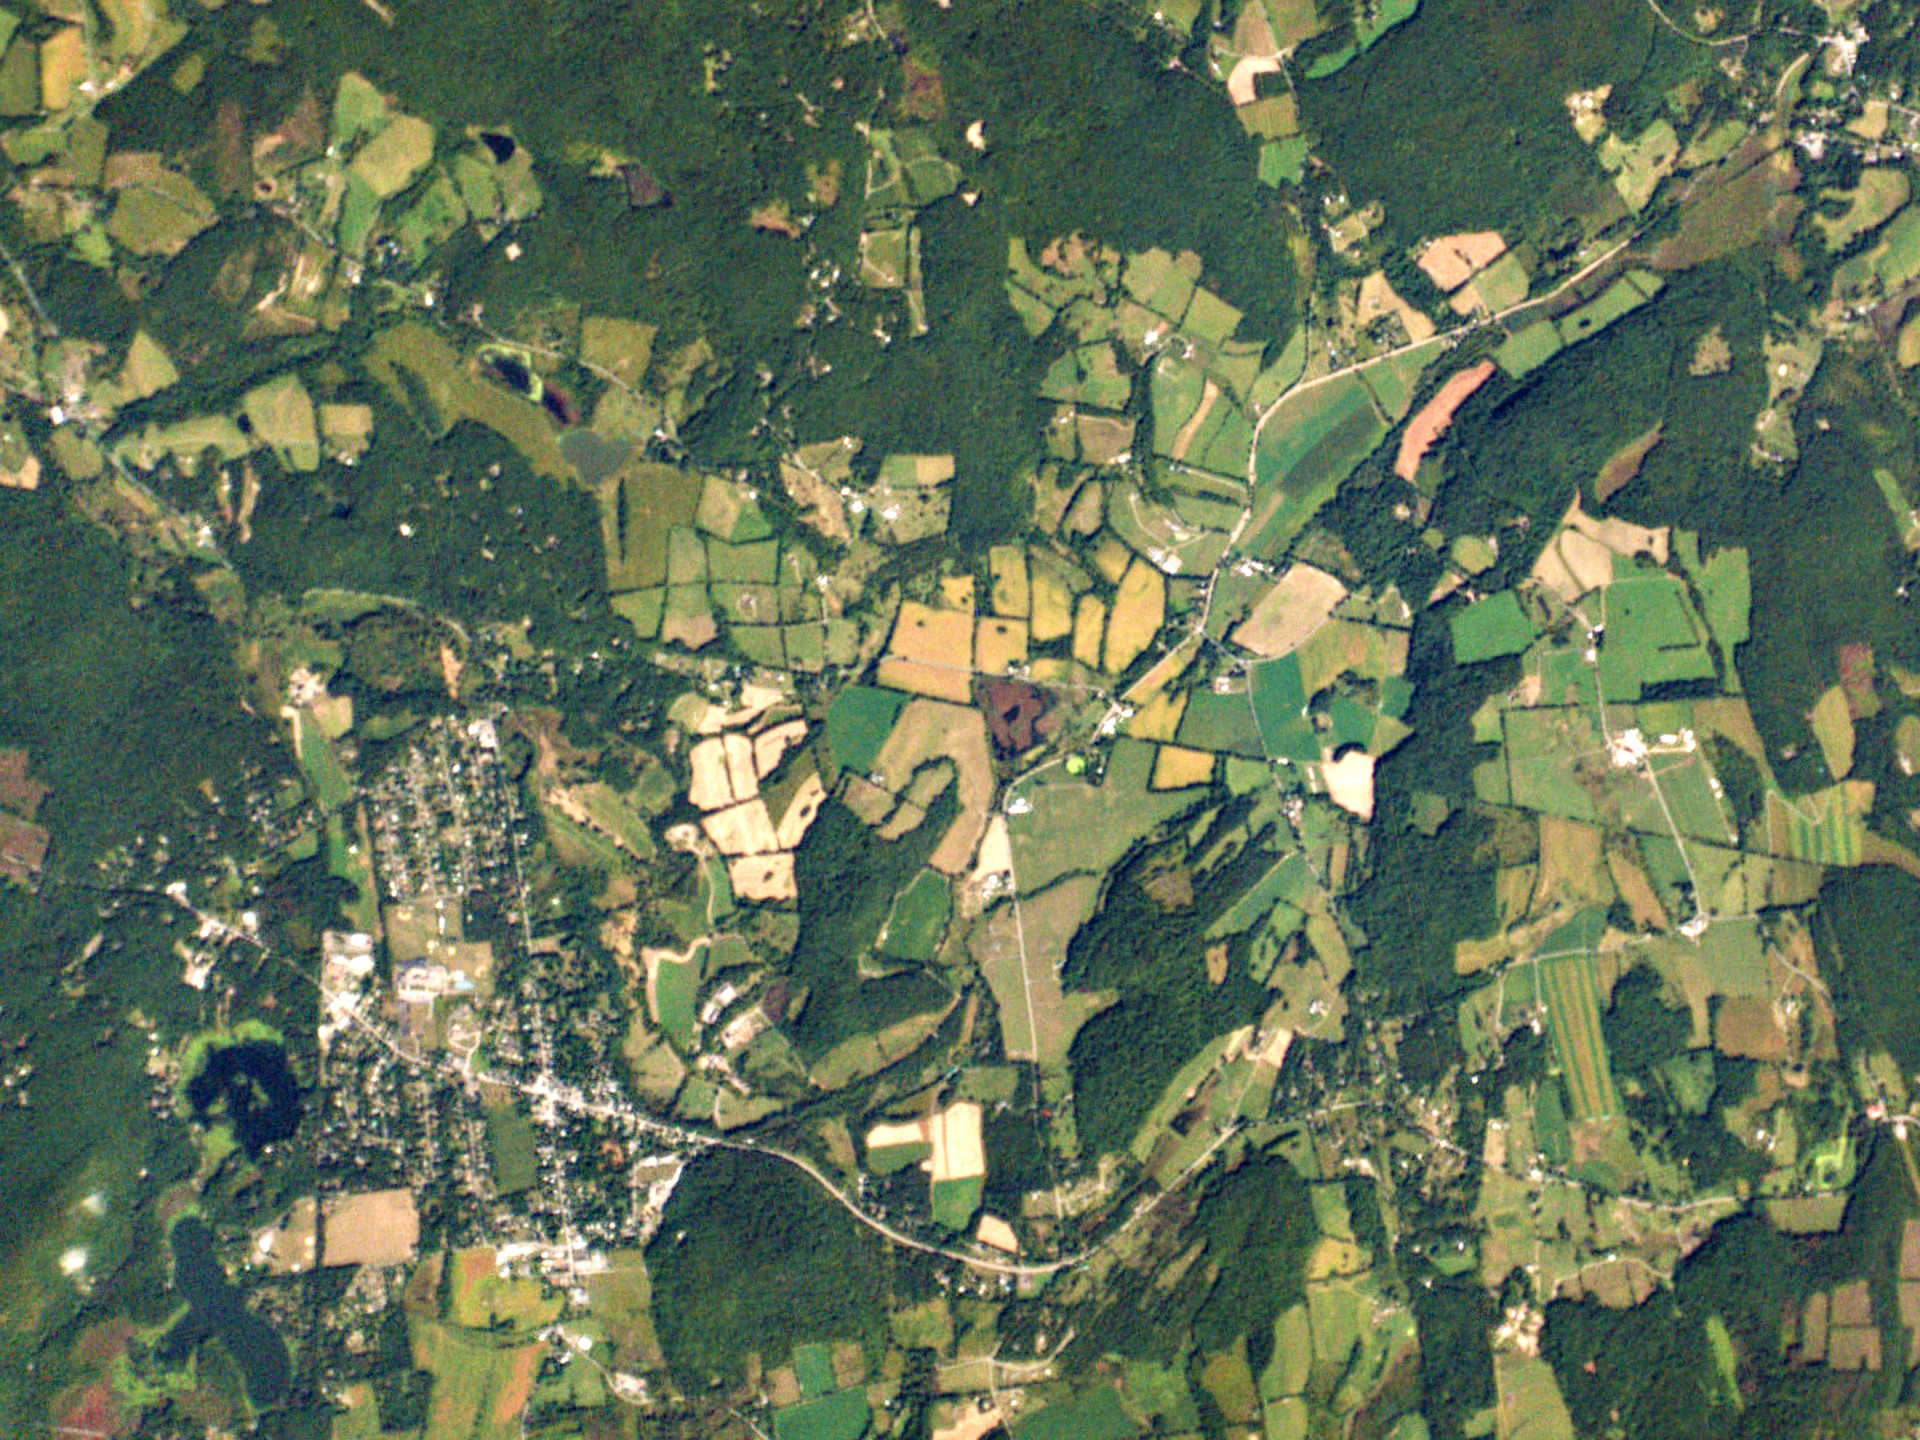 Pine Plains, N.Y. is an agricultural community about 100 miles from New York City, photographed here on Sept. 17, 2014. The U.C. Merced researchers estimate that New York City could potentially fulfill about 30 percent of its food needs with food grown within 100 miles of the city.